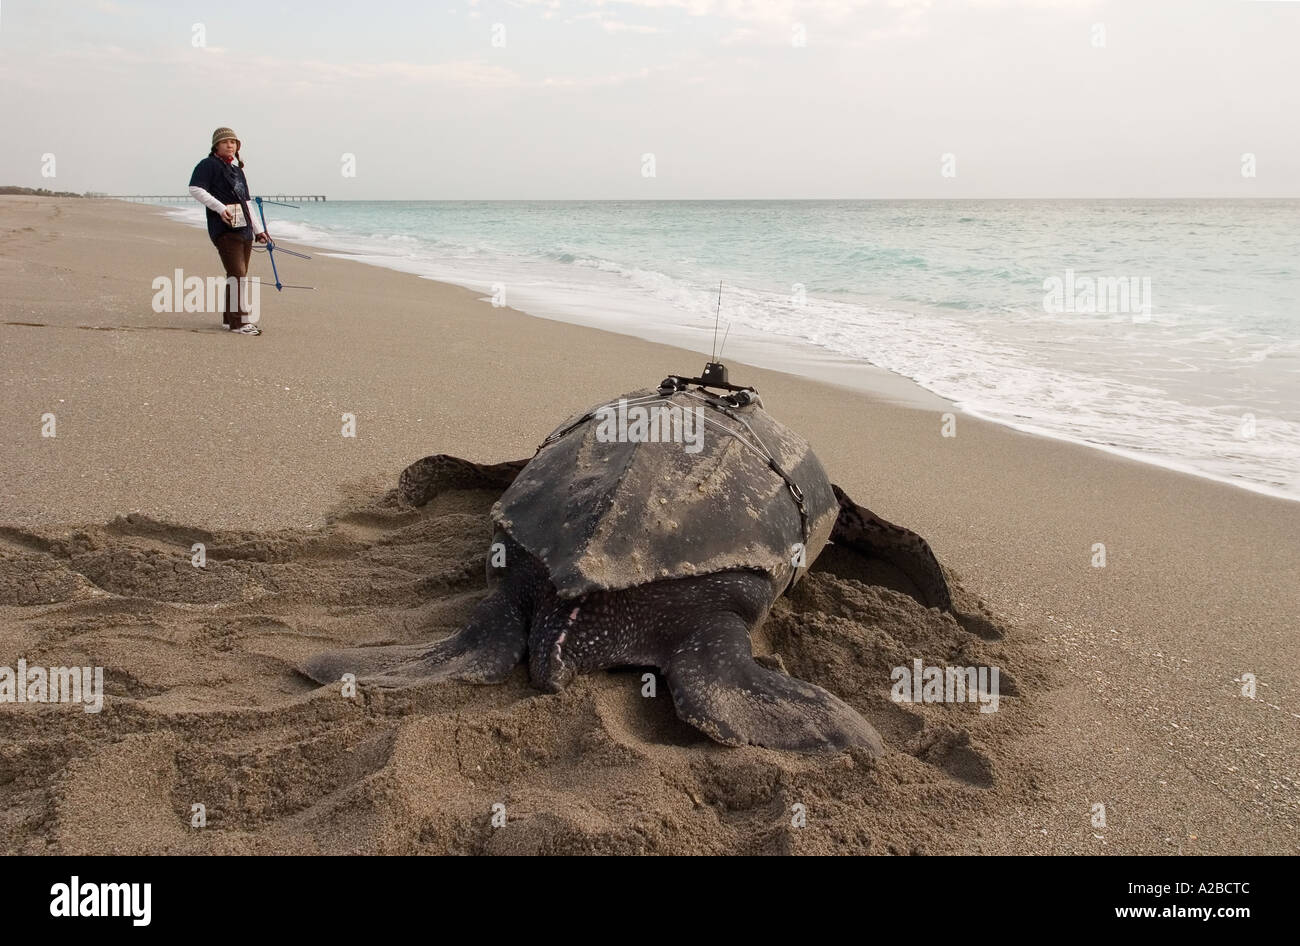 Leatherback sea turtle (Dermochelys coriacea) with satellite transmitter at dawn with researcher Stock Photo